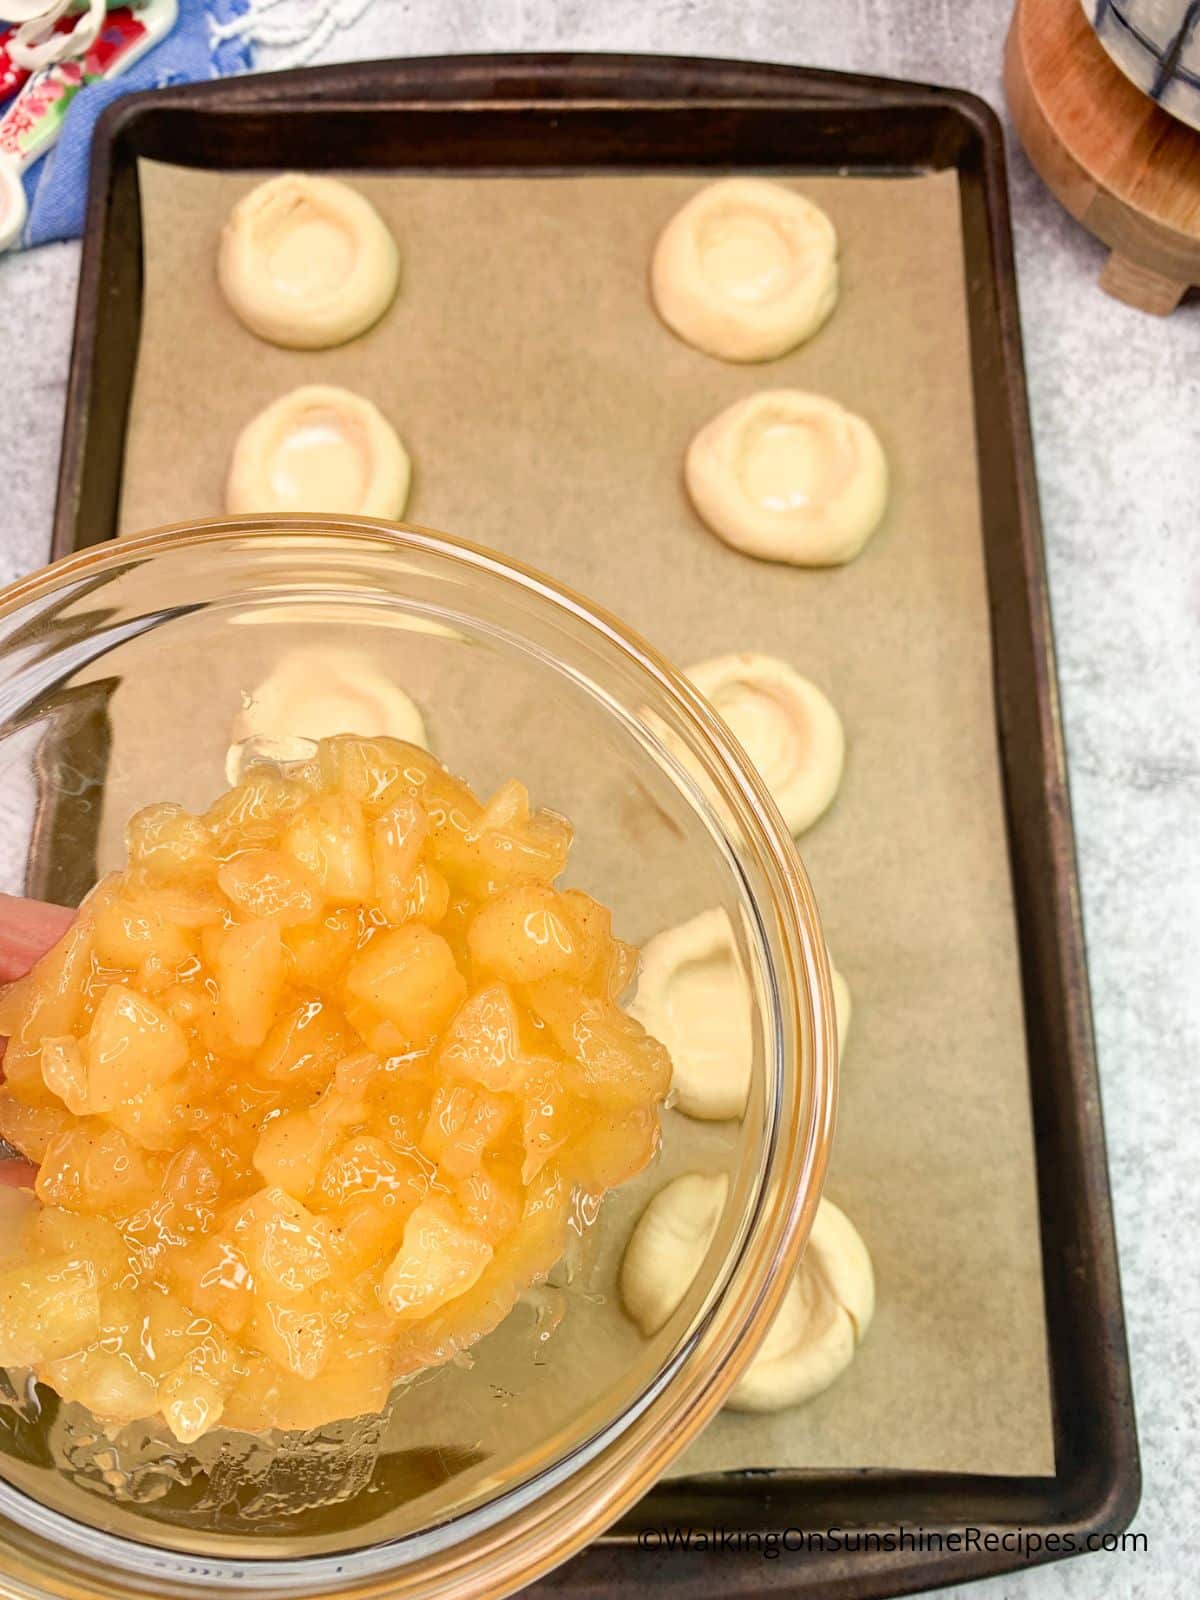 fill crescent roll circles with apple pie filling.